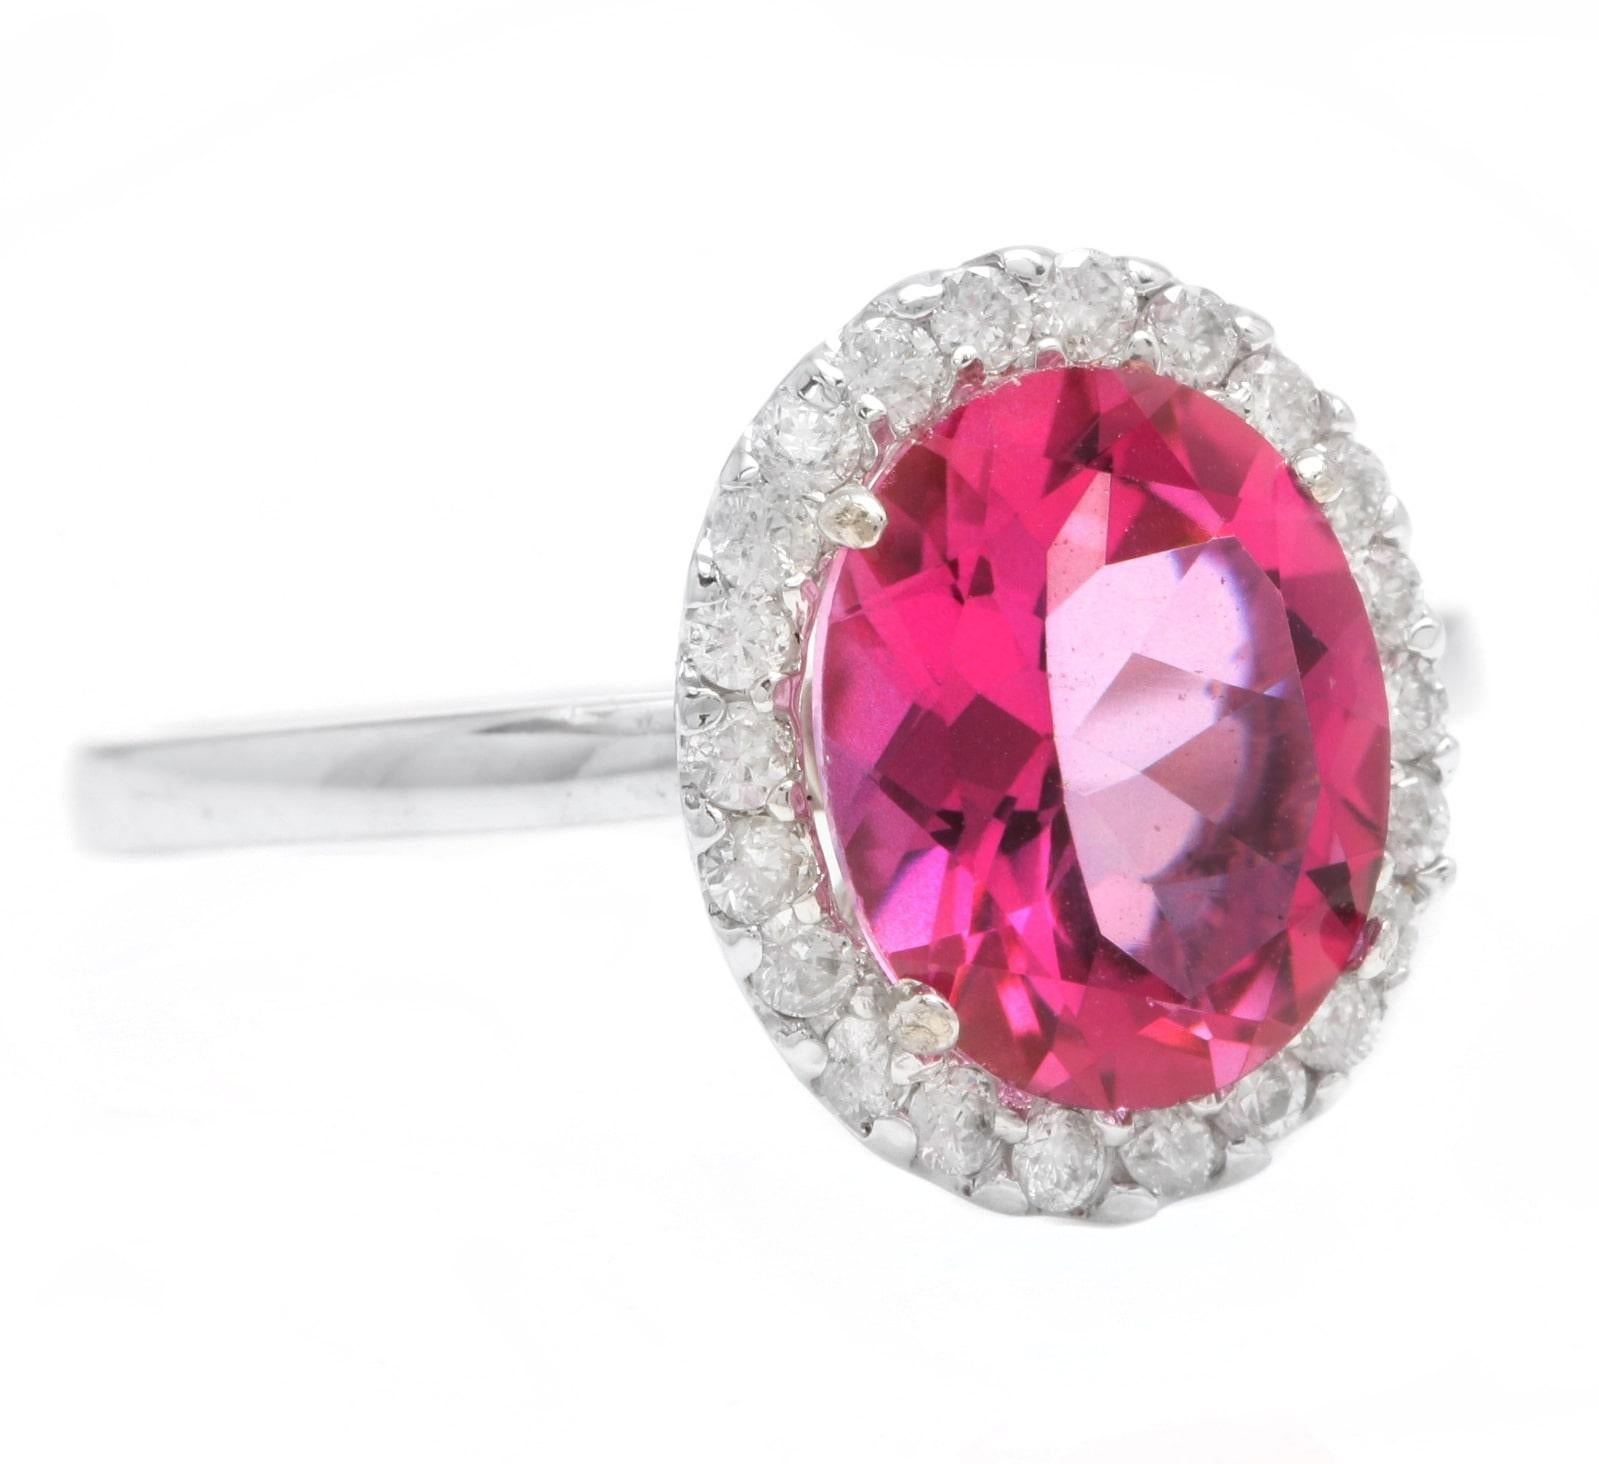 2.45 Carats Natural Very Nice Looking Pink Topaz and Diamond 14K Solid White Gold Ring

Total Natural Oval Cut Pink Topaz Weight is: Approx. 2.20 Carats

Topaz Measures: Approx. 10.00 x 8.00mm

Natural Round Diamonds Weight: Approx. 0.25 Carats